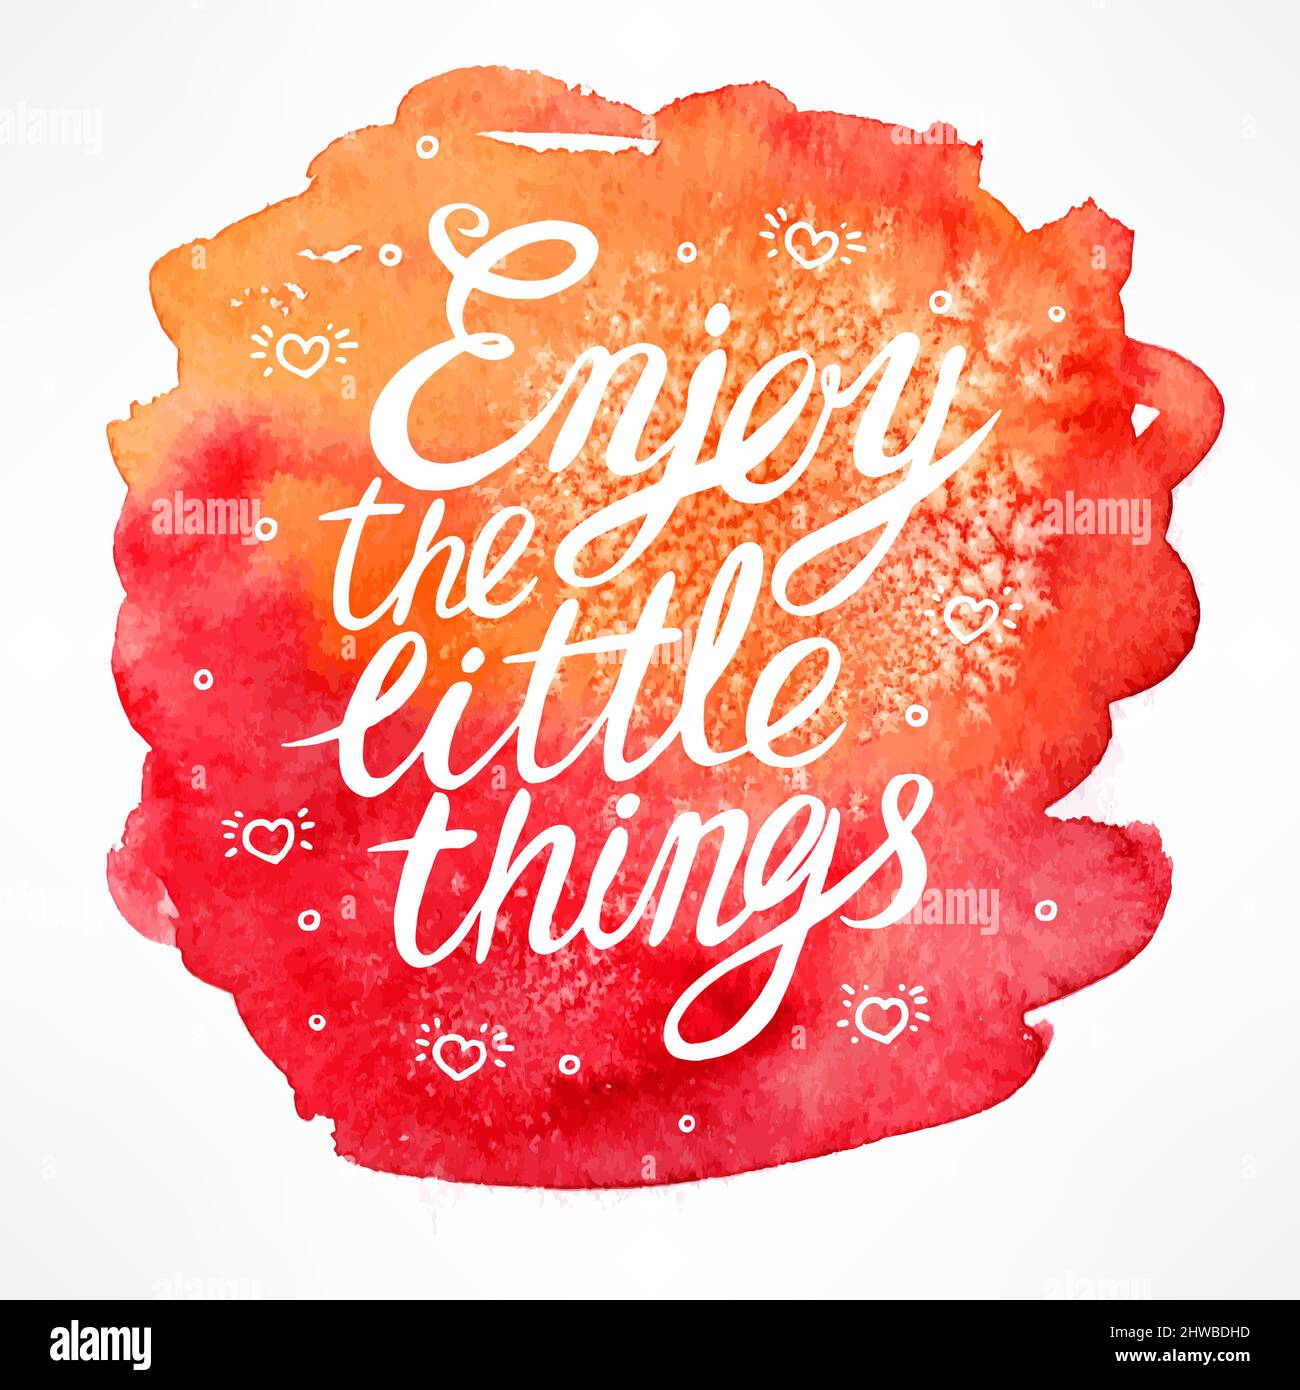 Enjoy the little things - hand-drawn quote on watercolor background Stock Vector